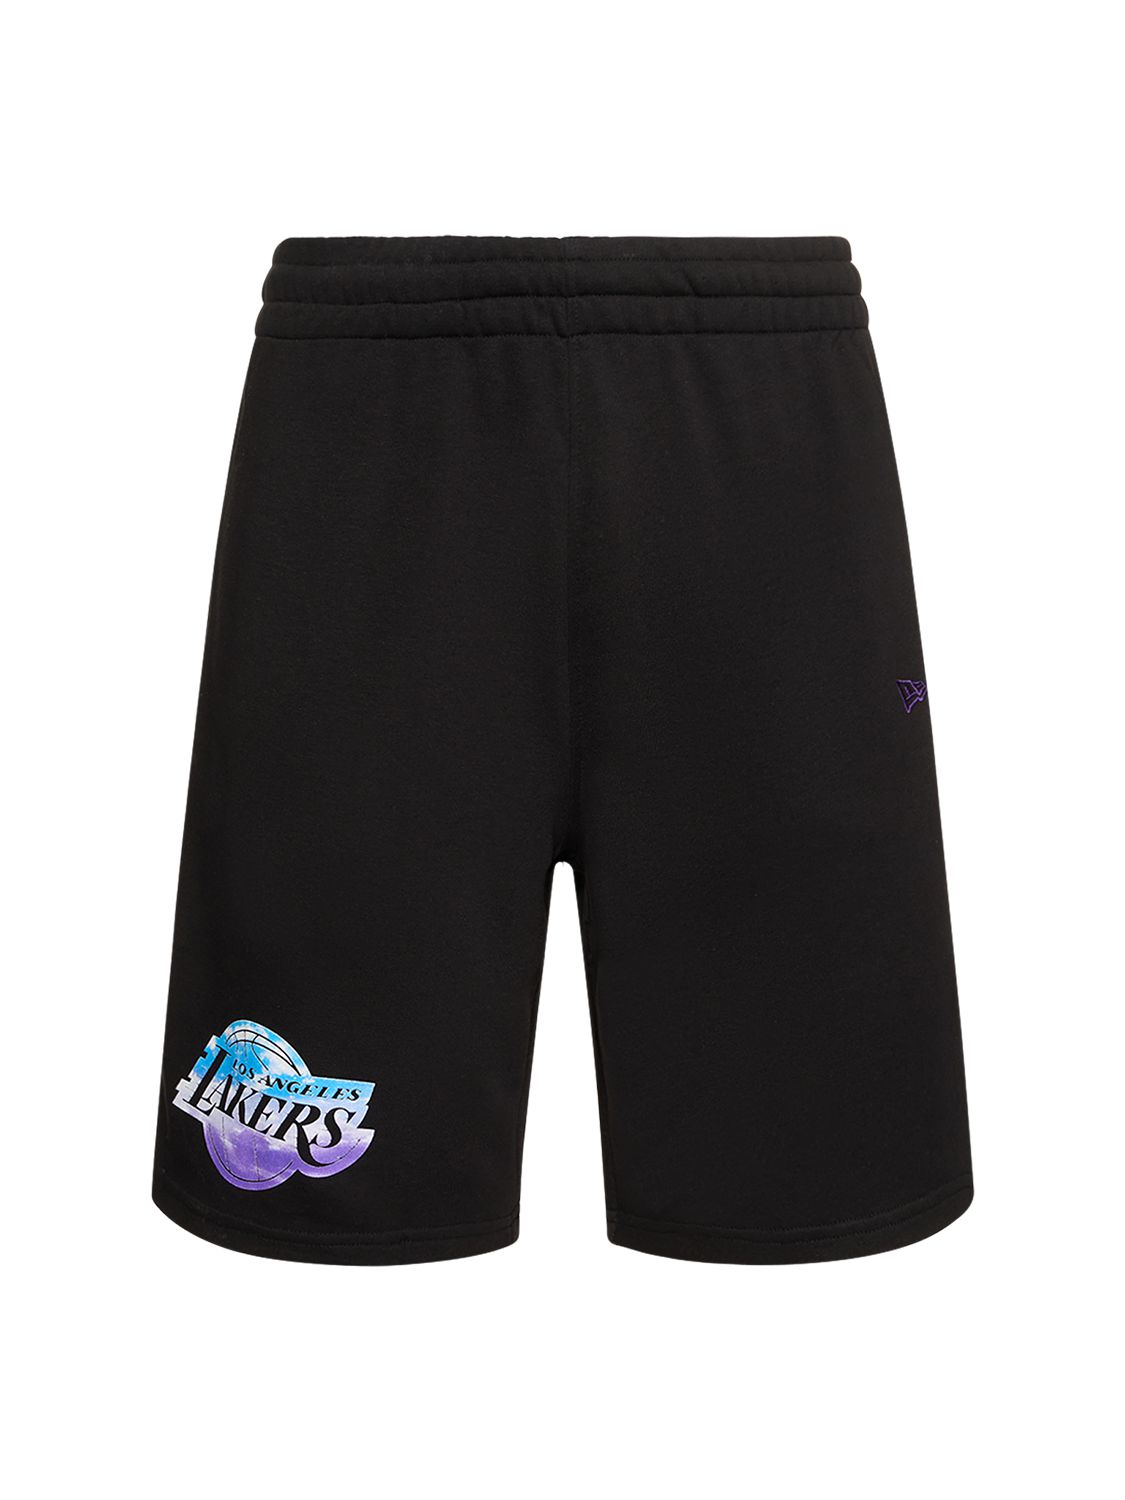 L.a. Lakers Printed Cotton Blend Shorts